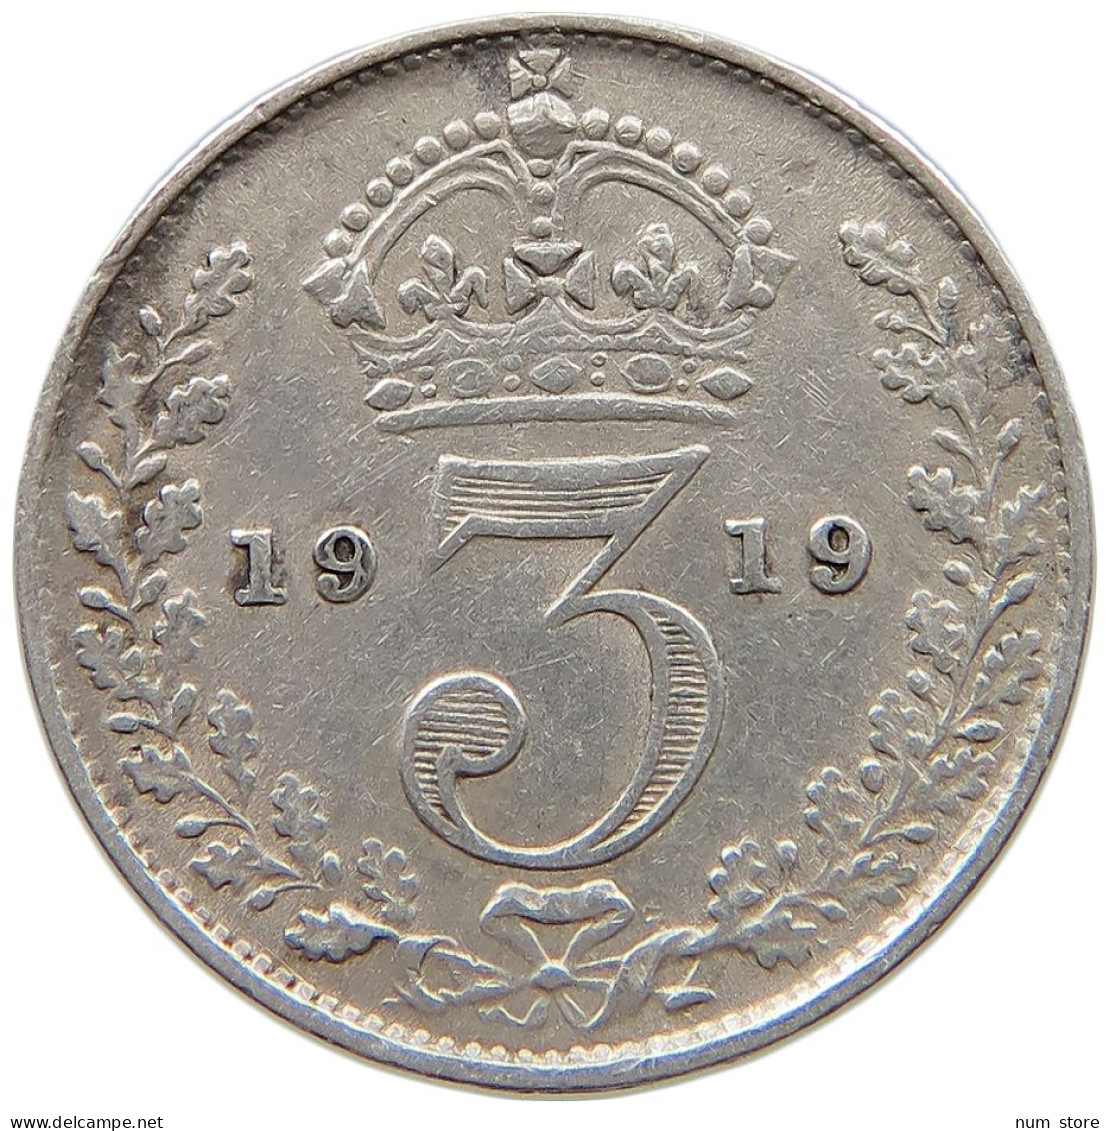 GREAT BRITAIN THREEPENCE 1919 #s059 0549 - F. 3 Pence